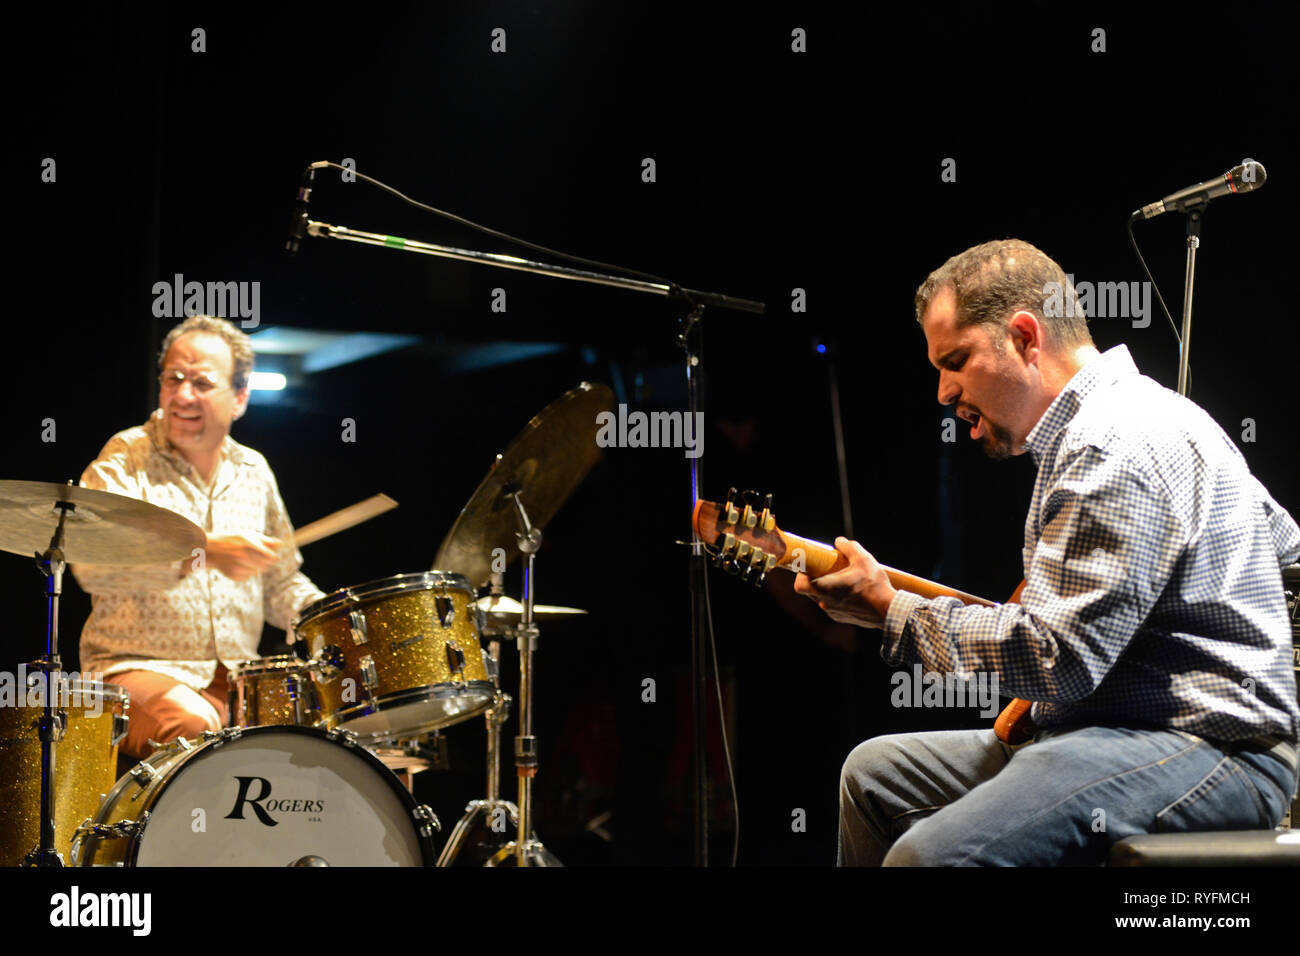 Jazz duo Charlie Hunter (guitar) and Scott Amendola (drums) playing live in concert Stock Photo